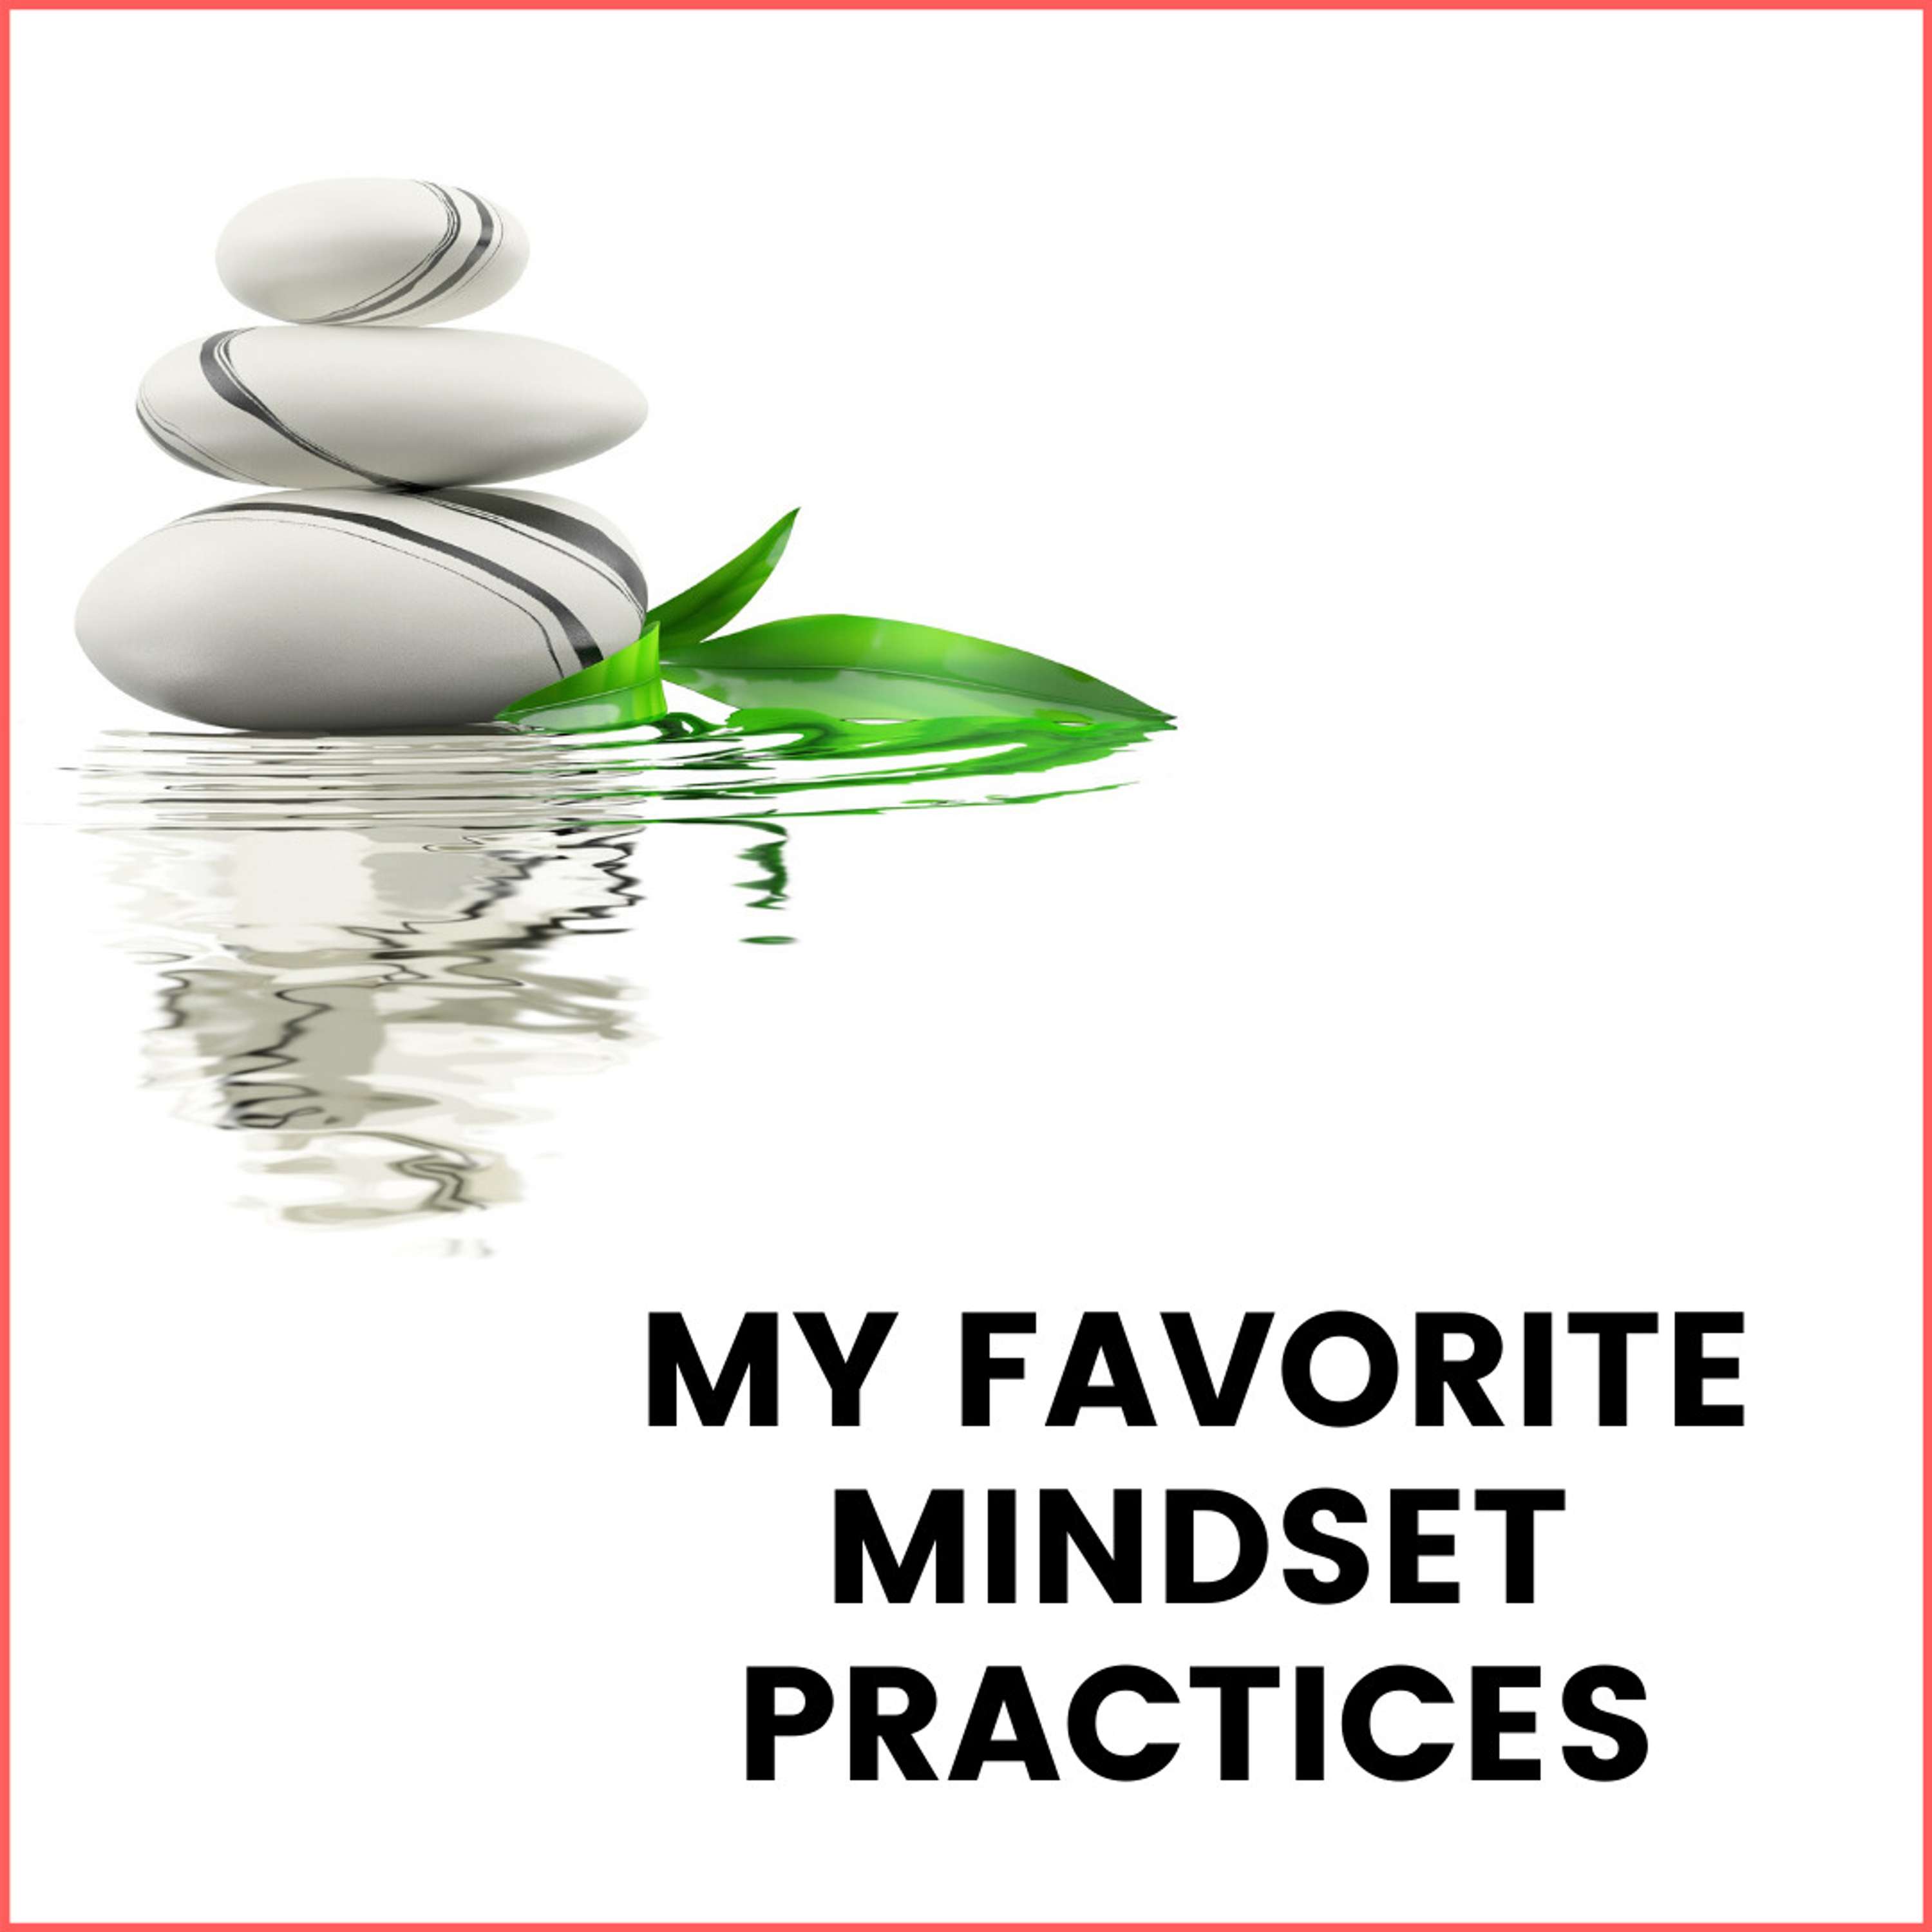 29. My favorite mindset practices (to keep calm during coronavirus and recession)